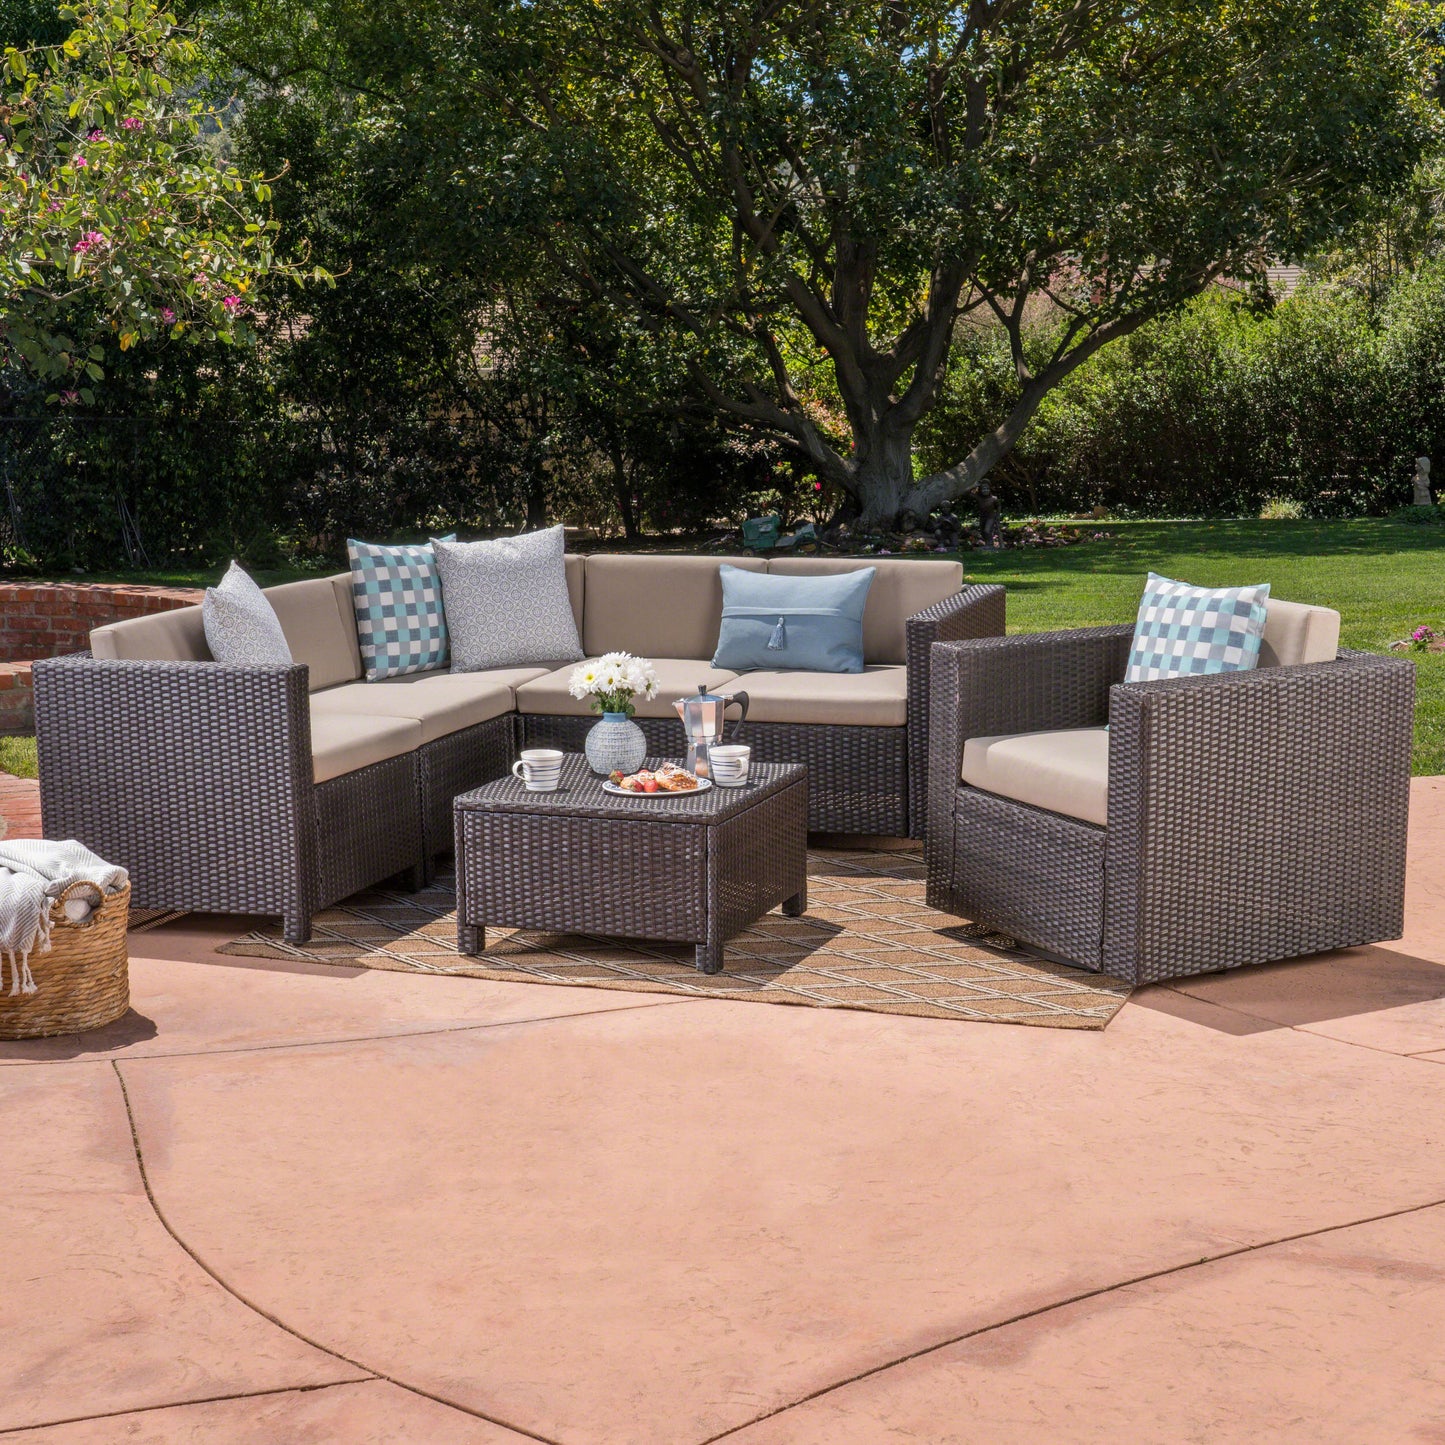 Phillips Outdoor 6 Seater Wicker V-Shaped Sofa and Swivel Chair Set with Water Resistant Cushions